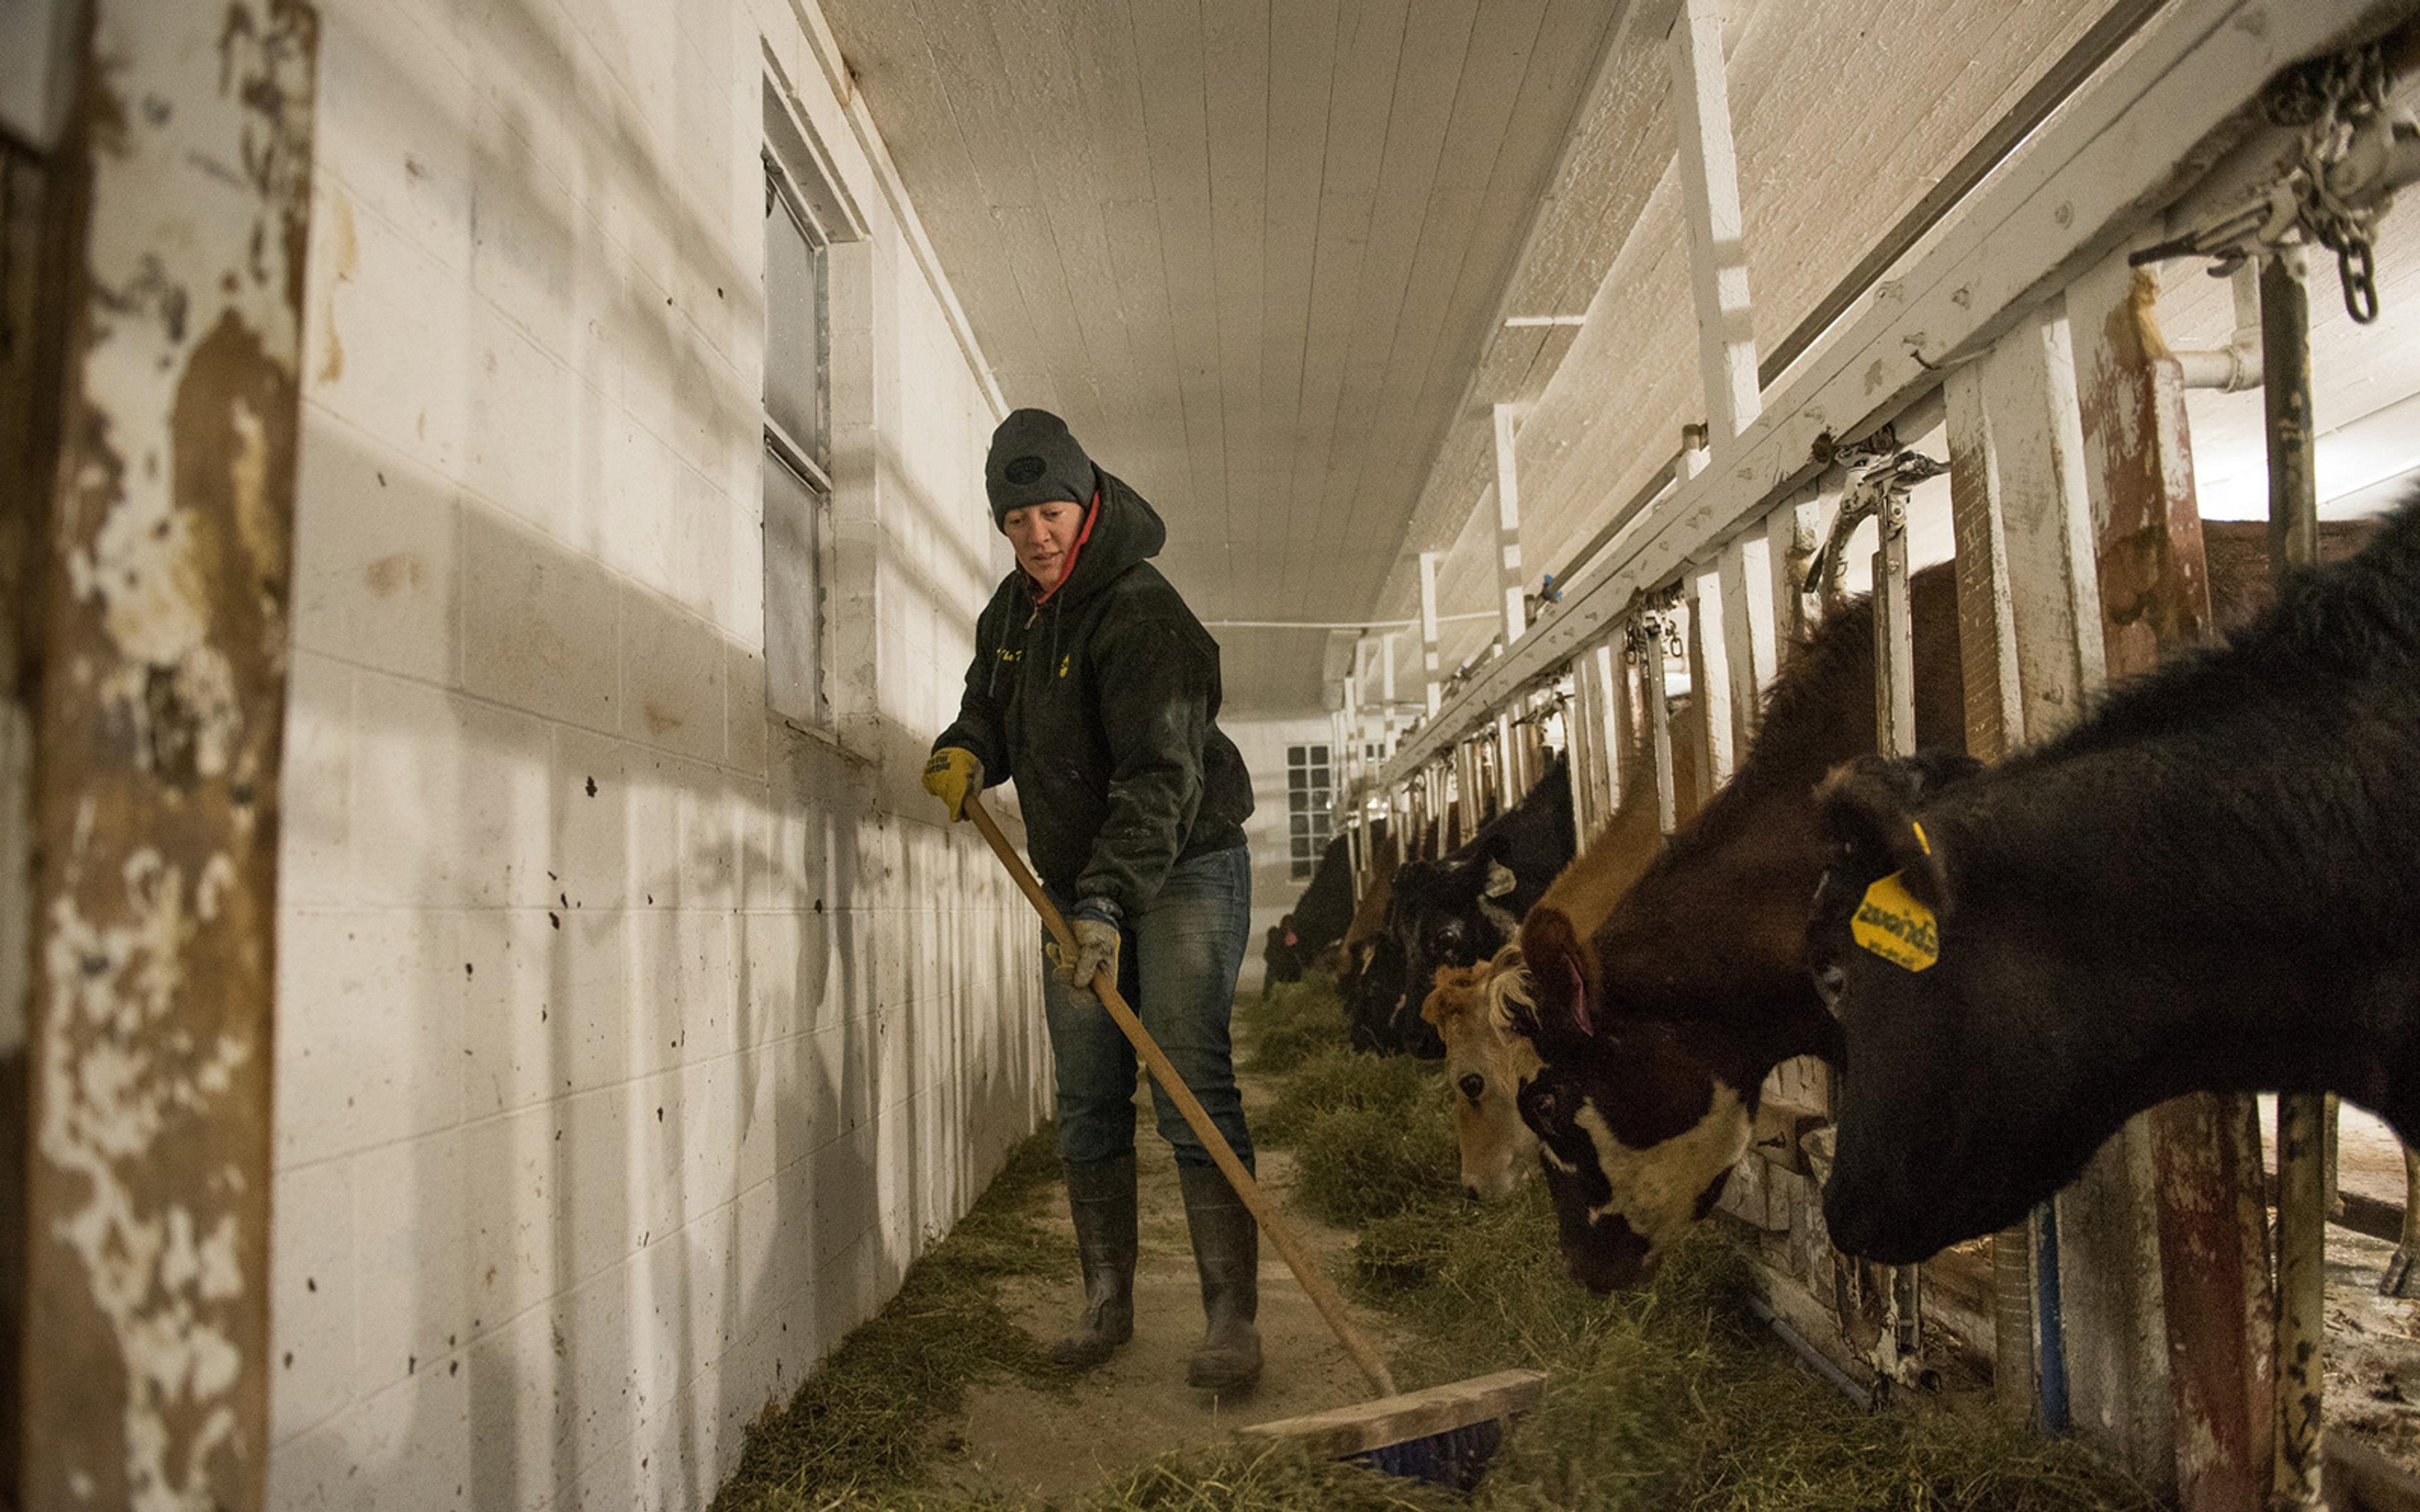 Amy Koenig gives her cows some hay during milking.